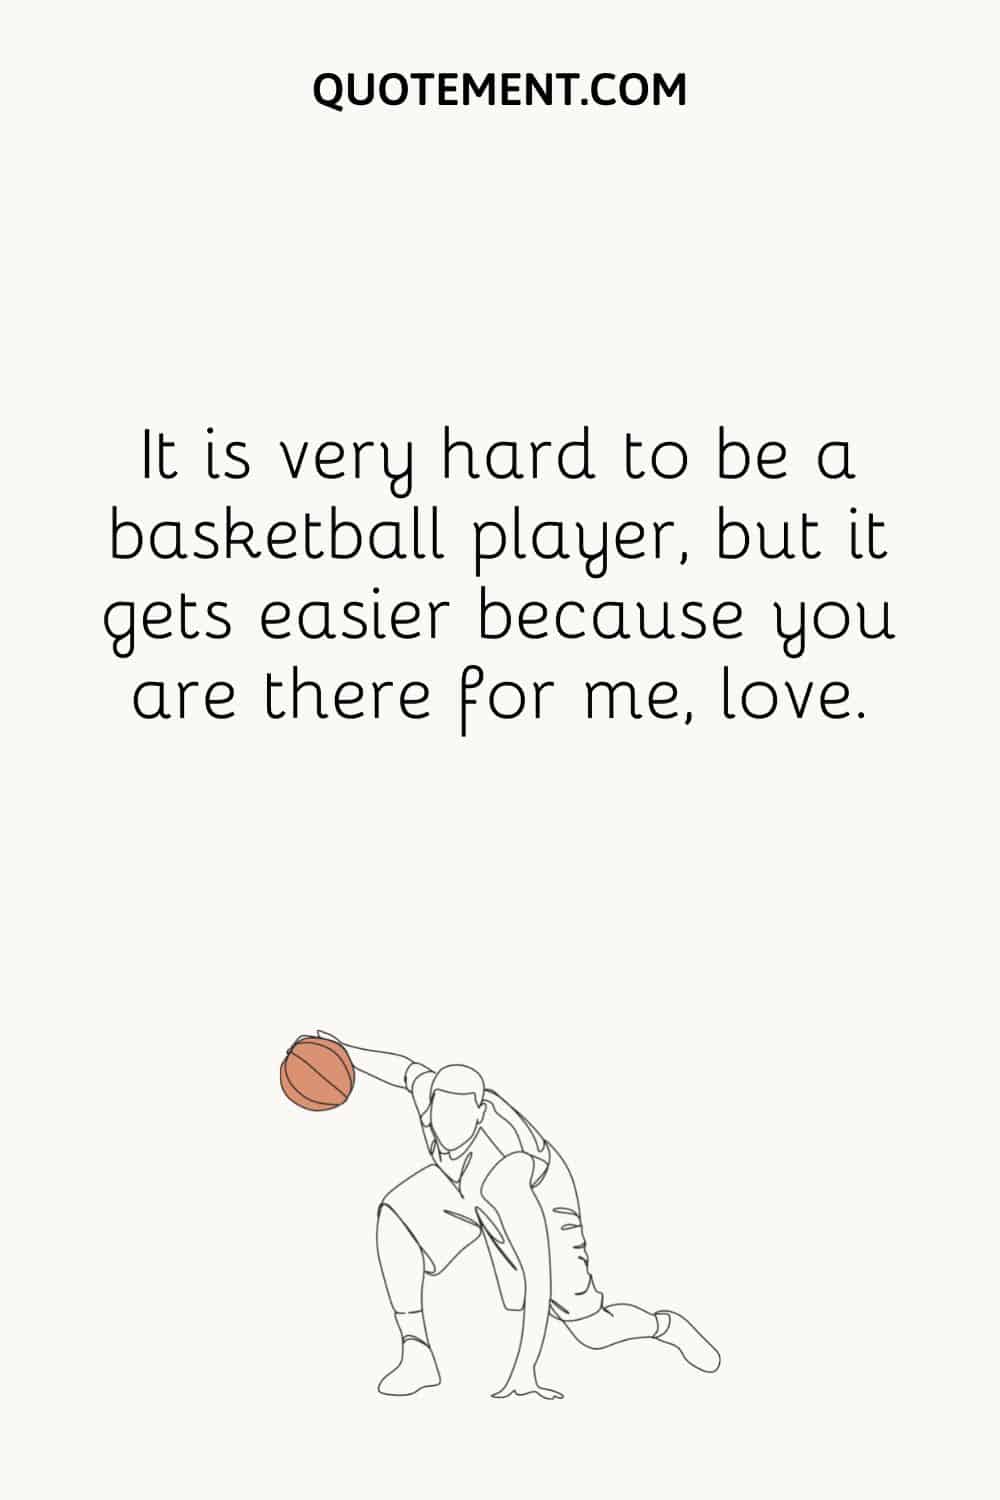 It is very hard to be a basketball player, but it gets easier because you are there for me, love